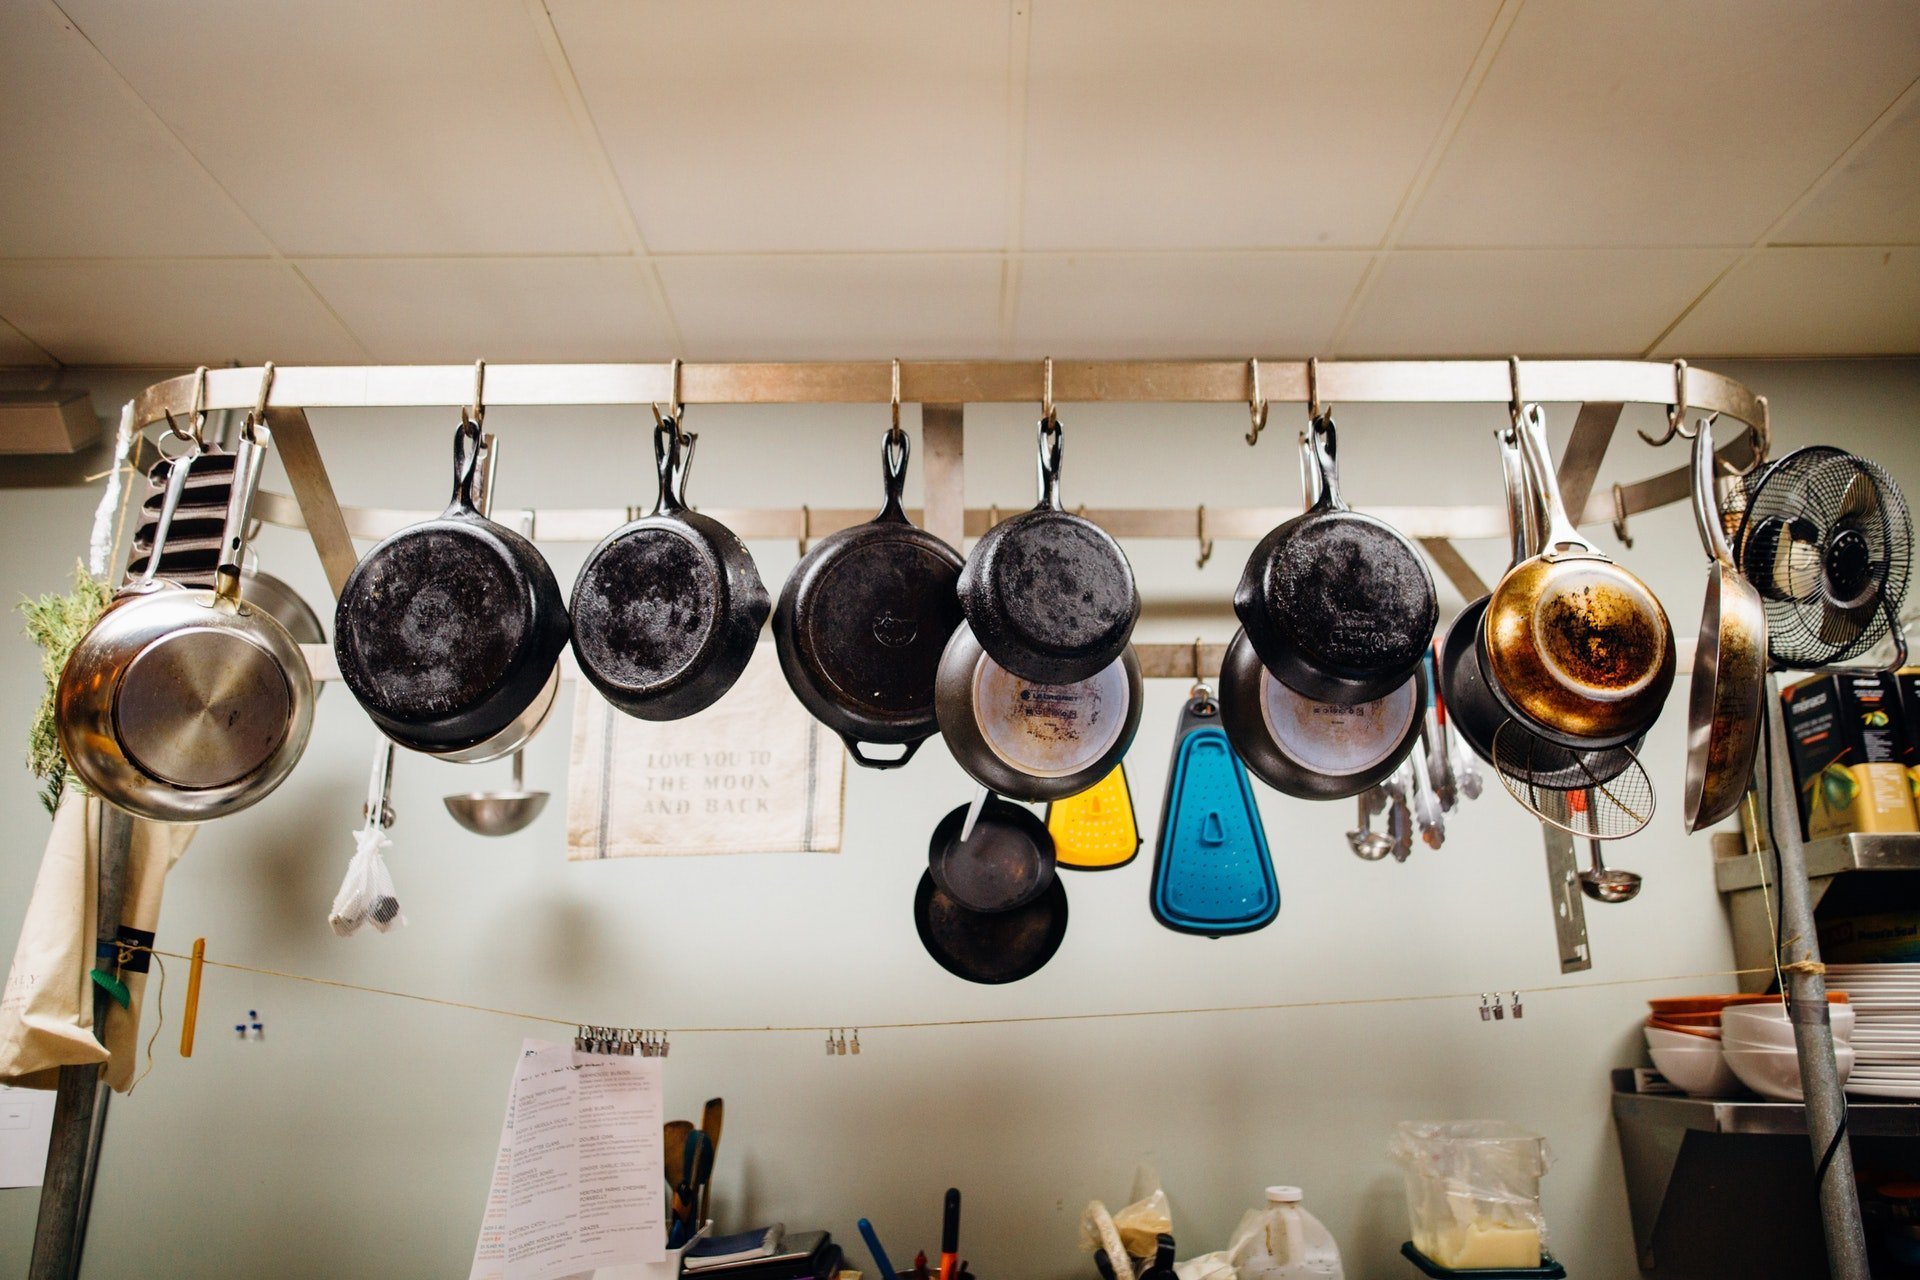 How to Care for your New Cookware